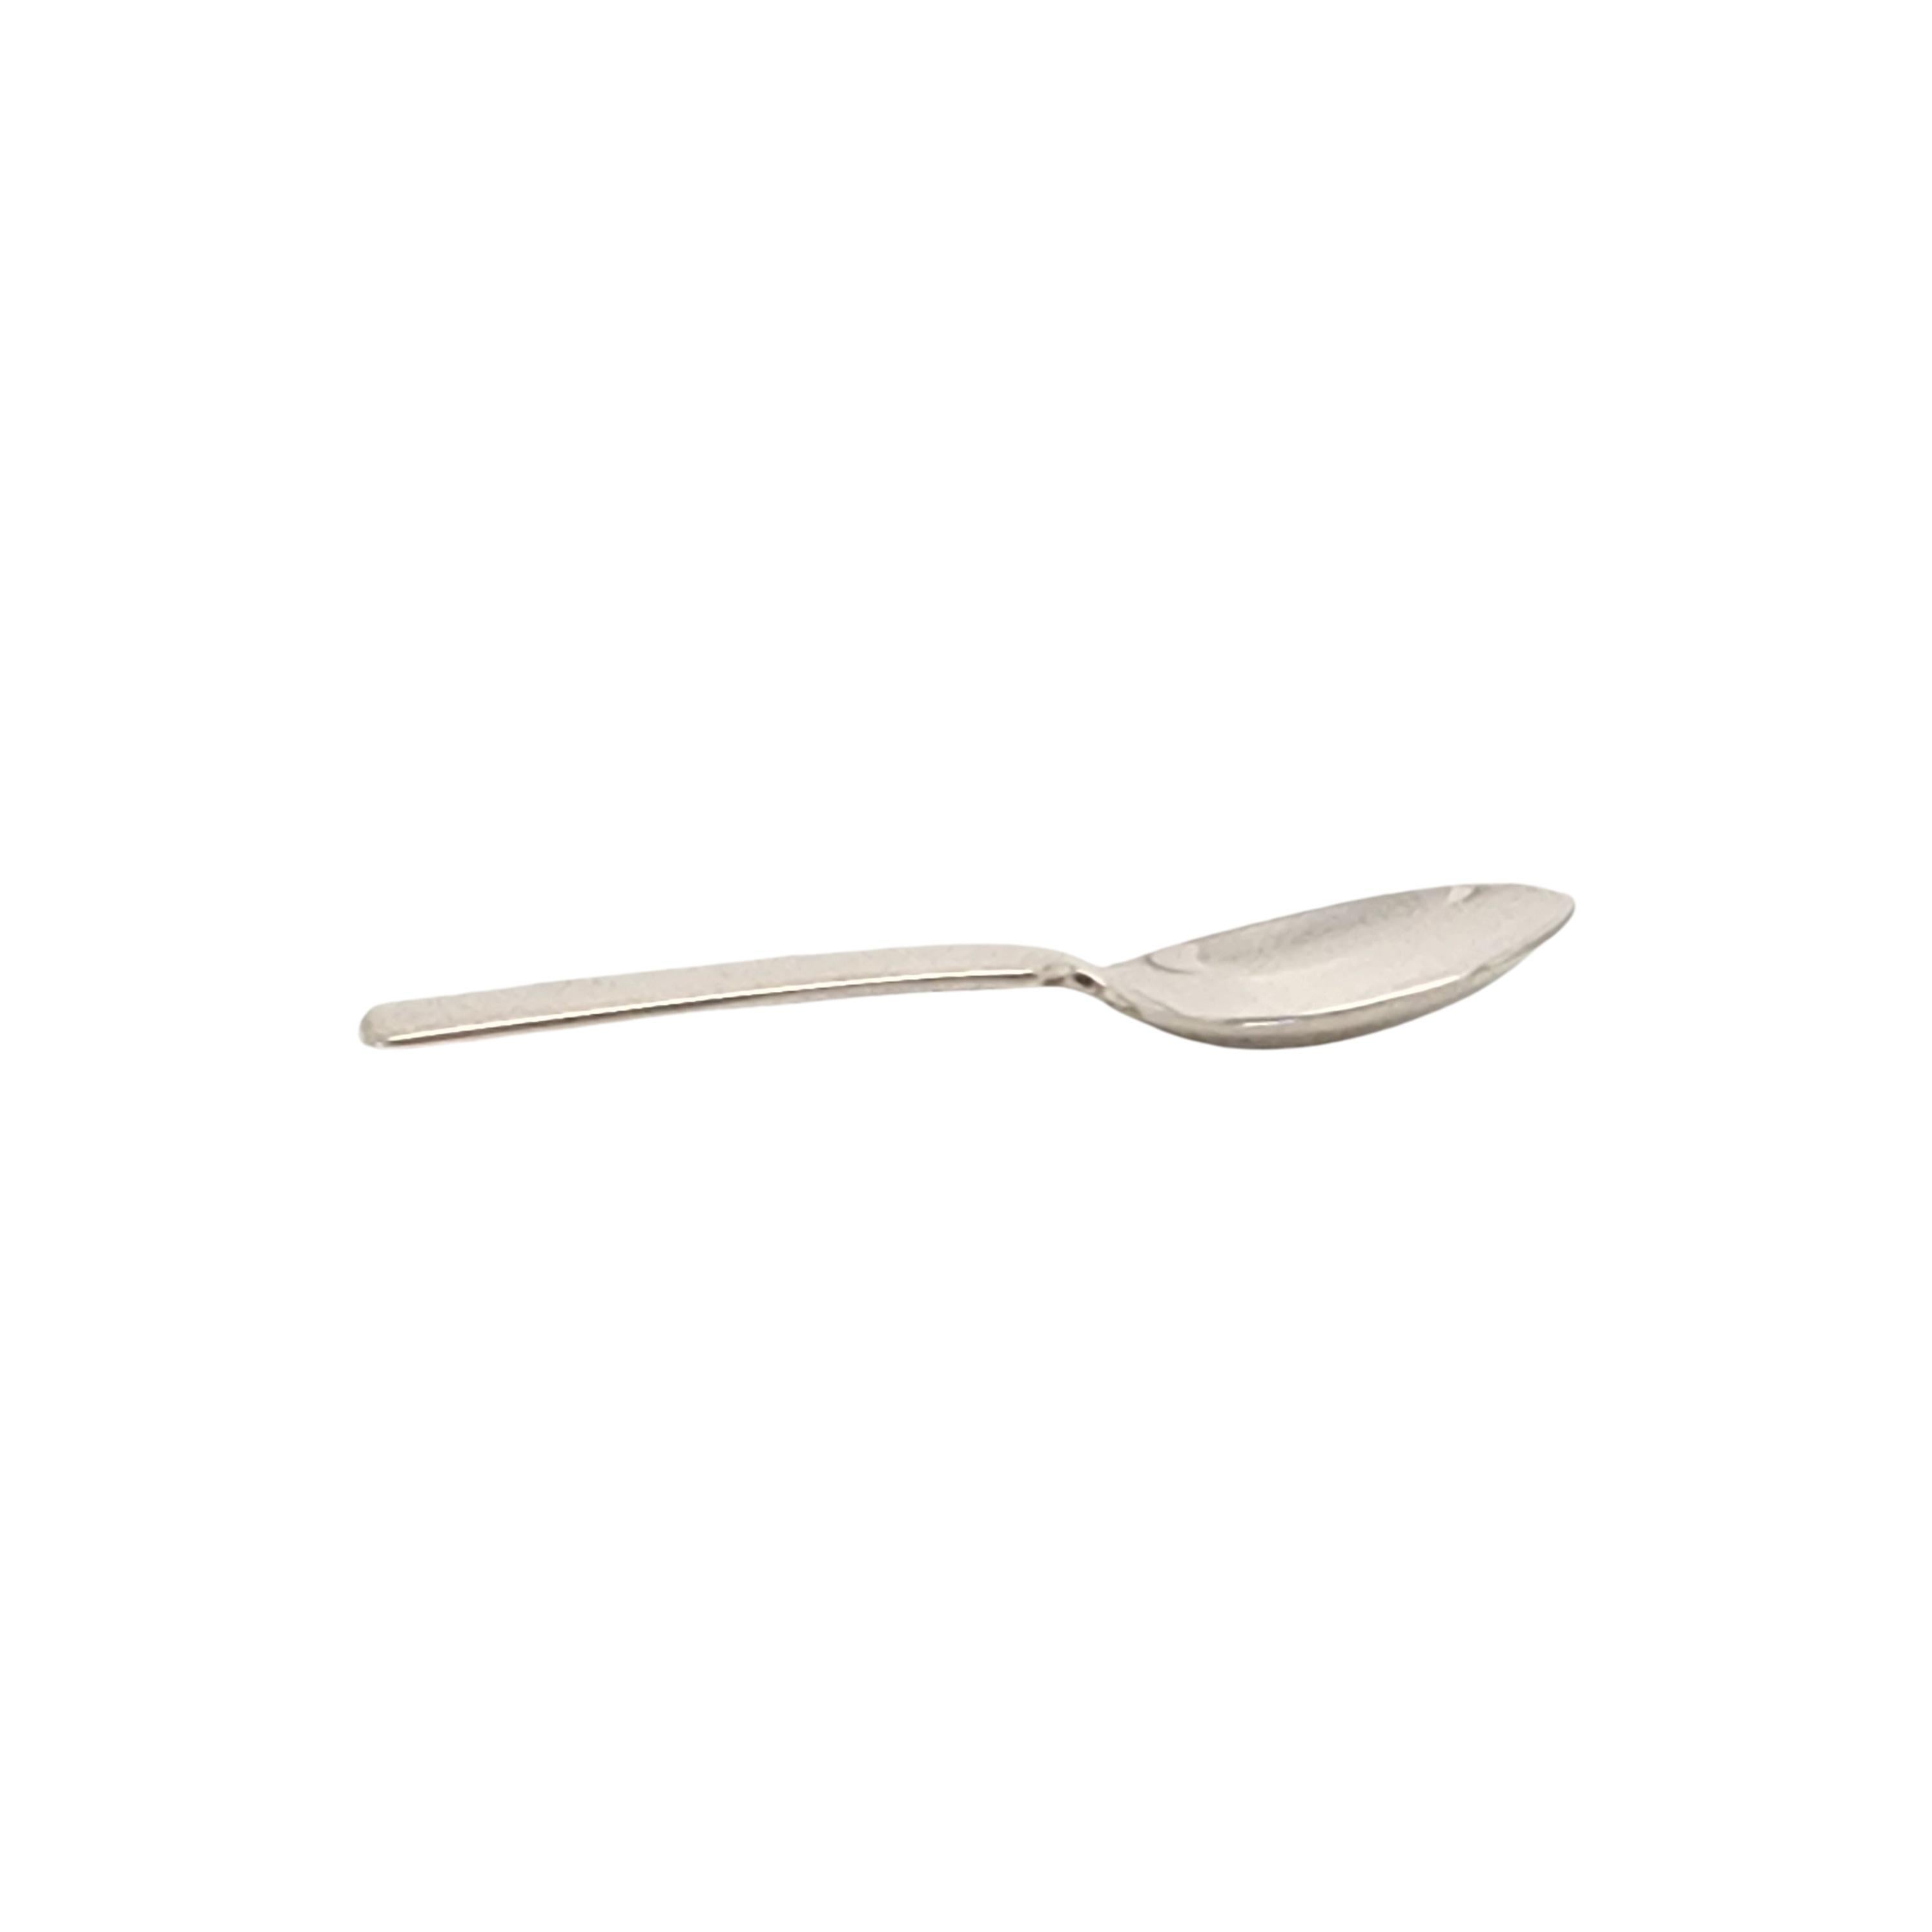 Women's Dominick & Haff for Cartier Sterling Silver Baby Spoon #16712 For Sale